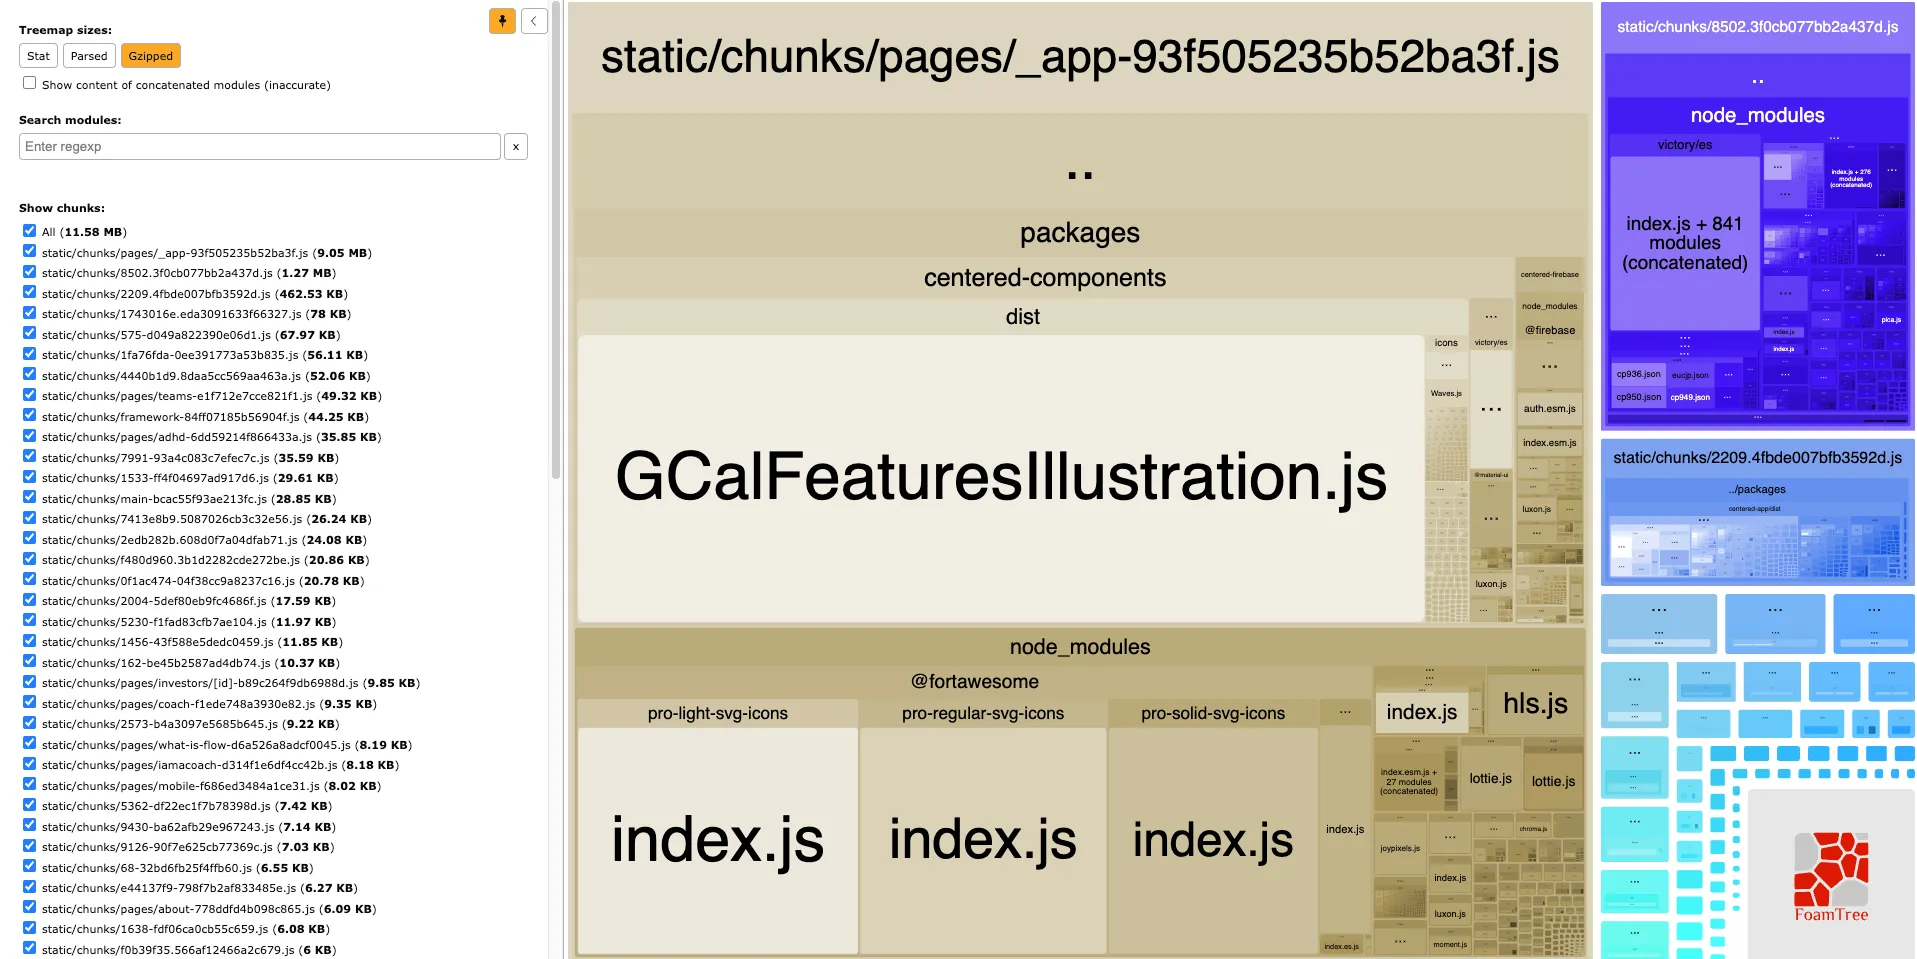 Webpack Bundle Analyzer gzipped output FoamTree visualization. Total chunk size is 11.58 MB, and the biggest chunk is pages/_app at 9.05 MB. A very large GCalFeaturesIllustration.js is inside the app bundle